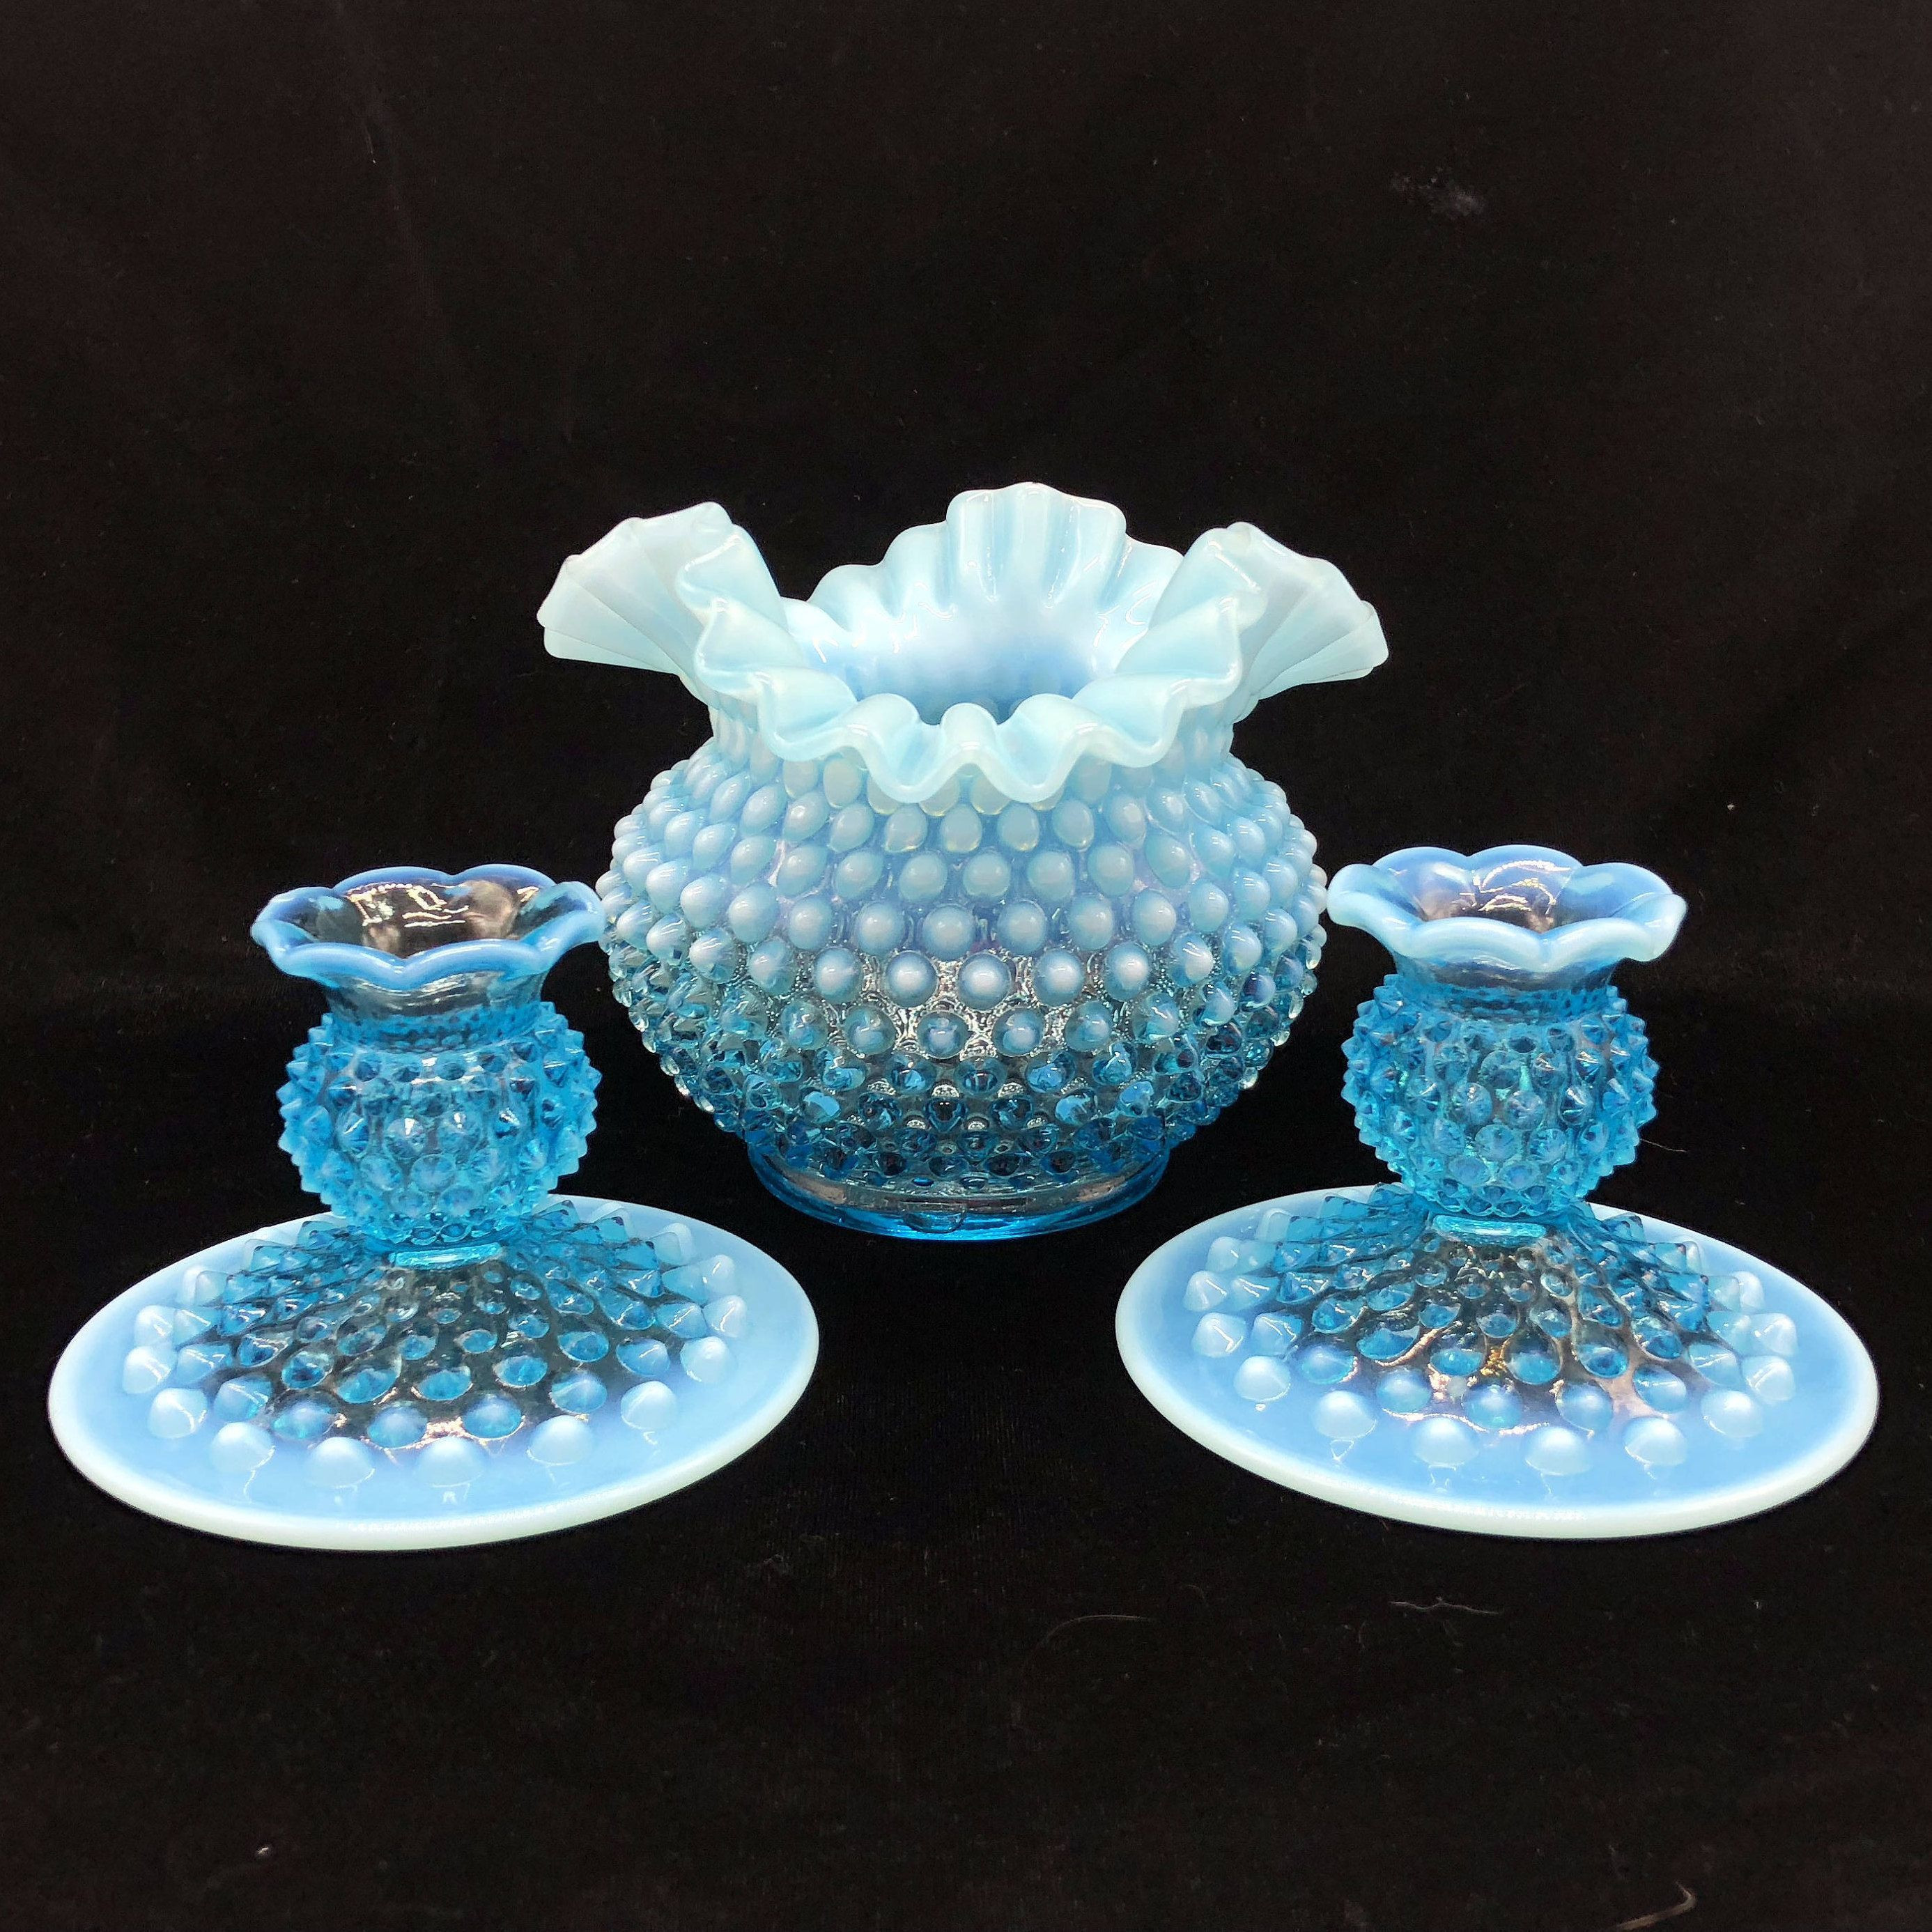 21 Lovable Mini Colored Glass Vases 2024 free download mini colored glass vases of 37 fenton blue glass vase the weekly world regarding fenton hobnail glass centerpiece set blue opalescent vase candle